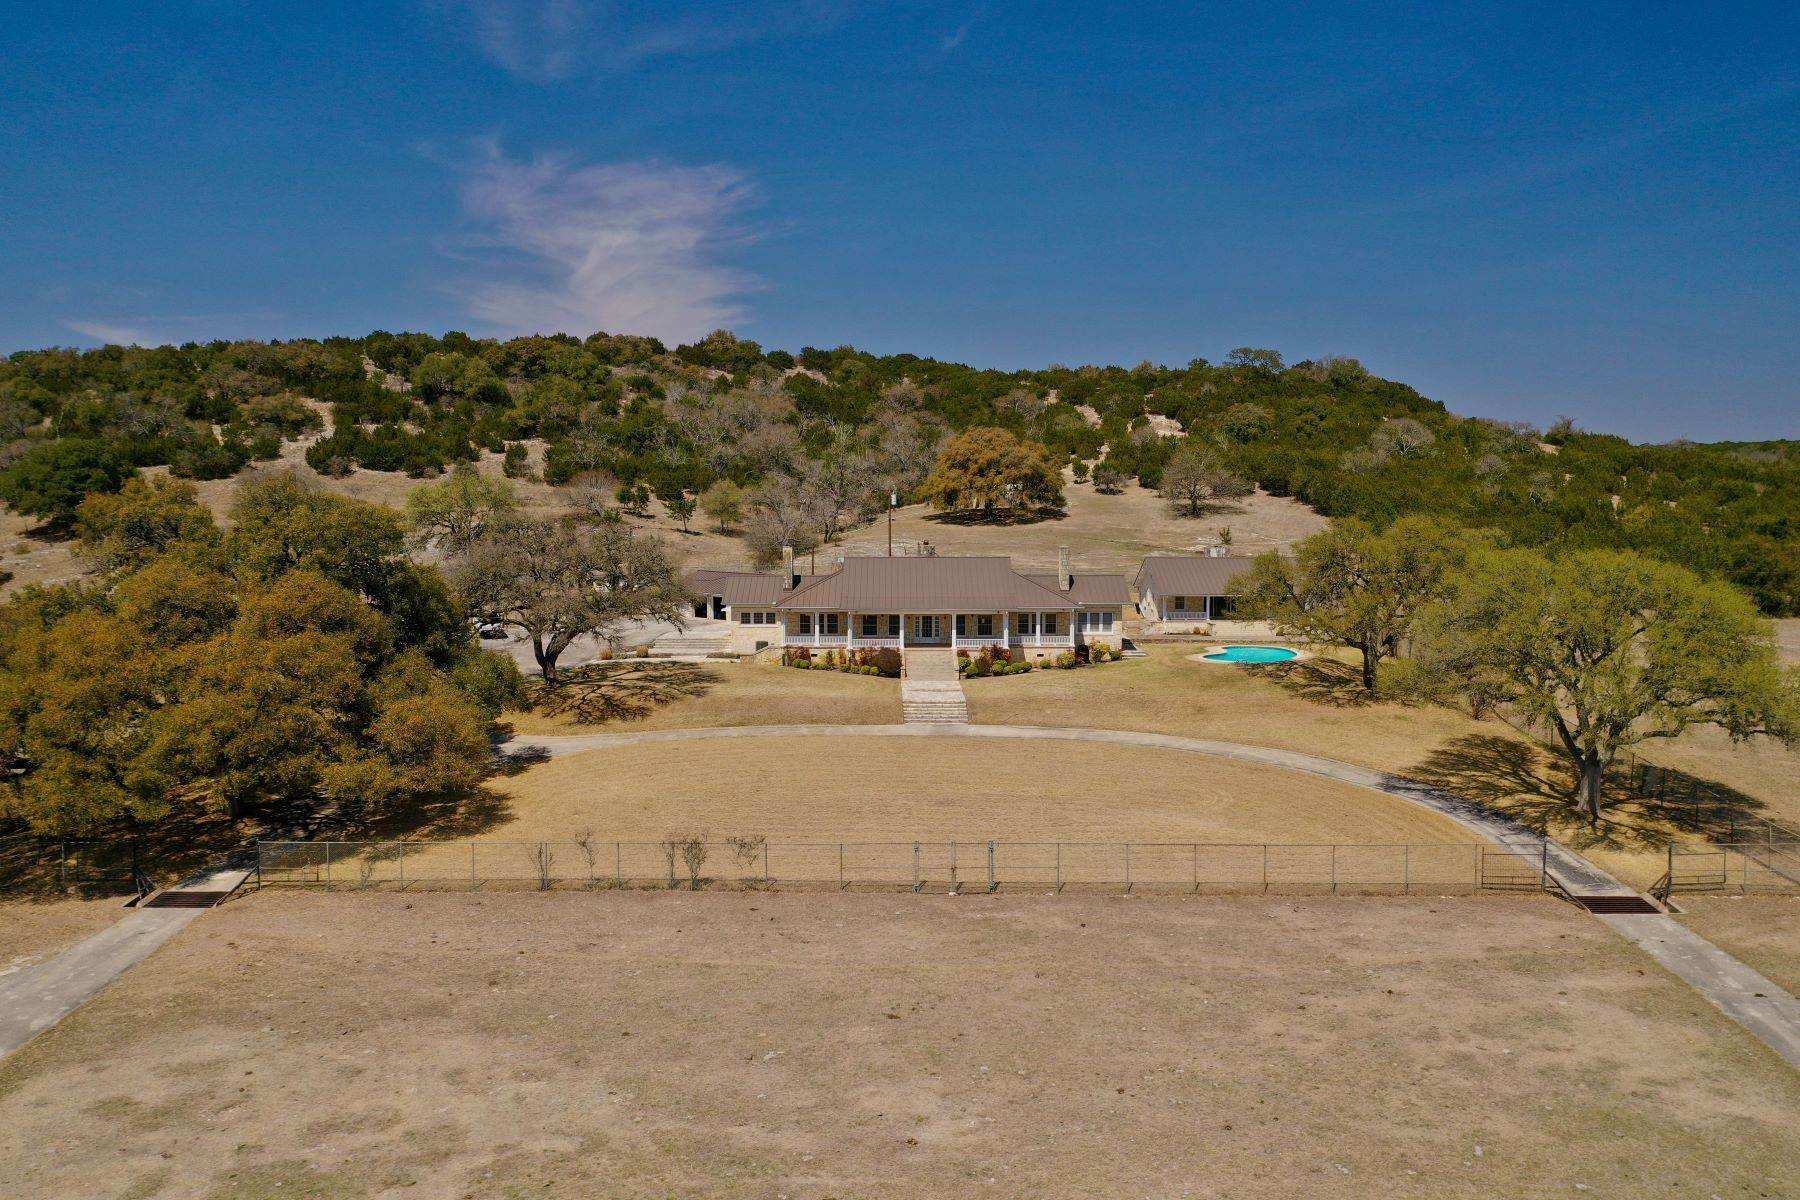 7. Farm and Ranch Properties for Sale at 2,269.85+/- Acres Less Ranch, Kendall County, Boerne, TX 78006 2,269.85+/- Acres Less Ranch, Kendall County, 650 Wild Turkey Blvd. Boerne, Texas 78006 United States